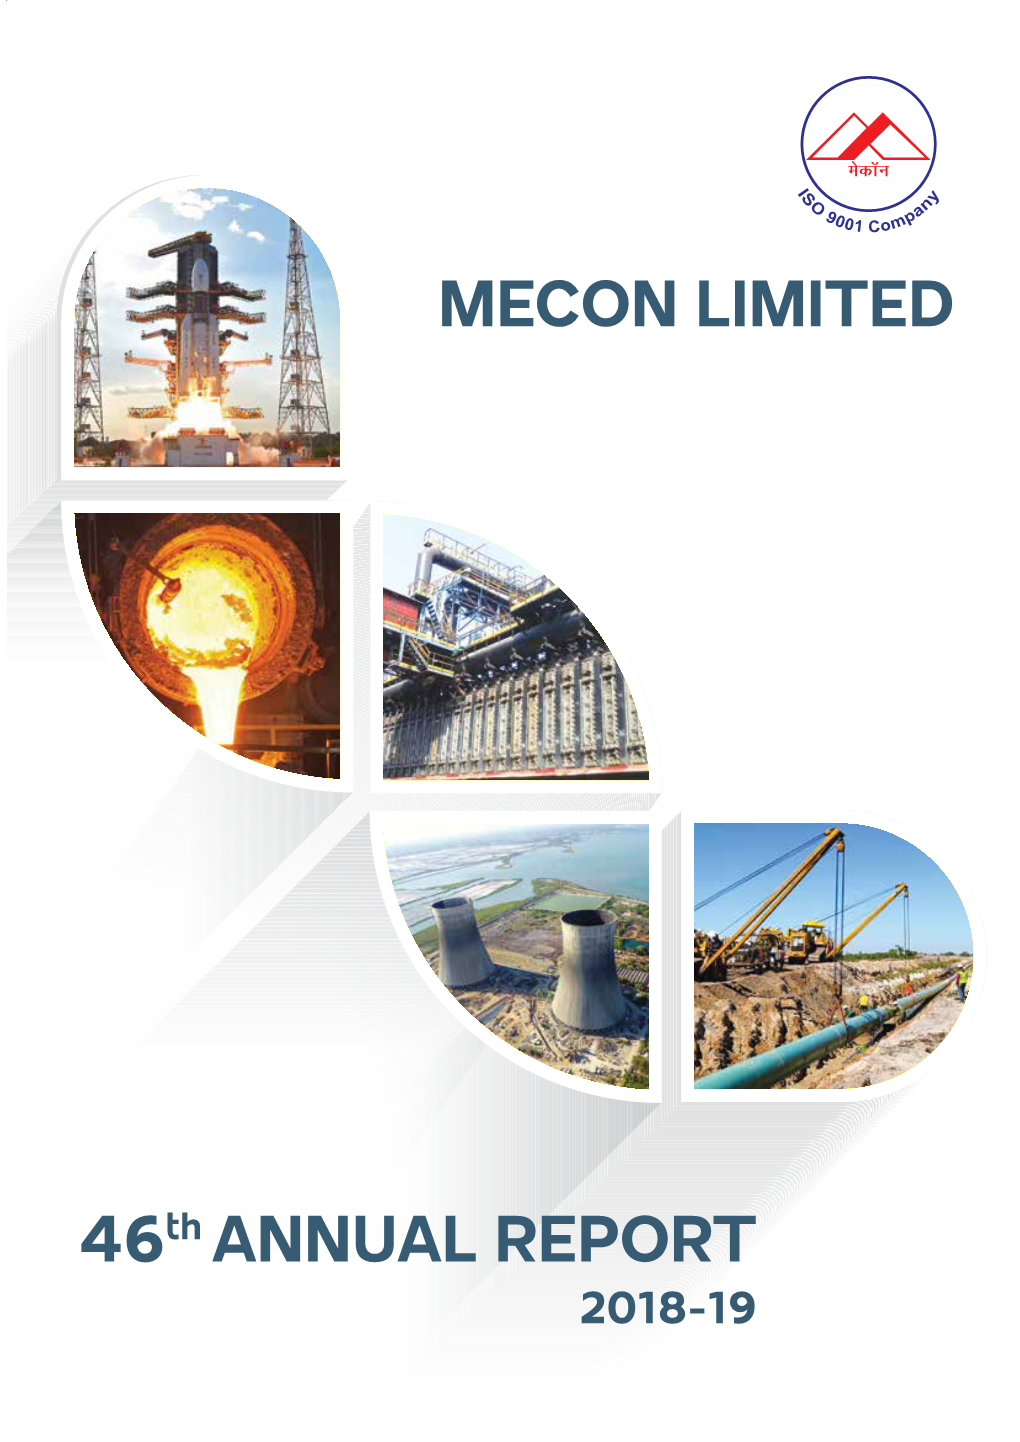 46Th ANNUAL REPORT MECON LIMITED